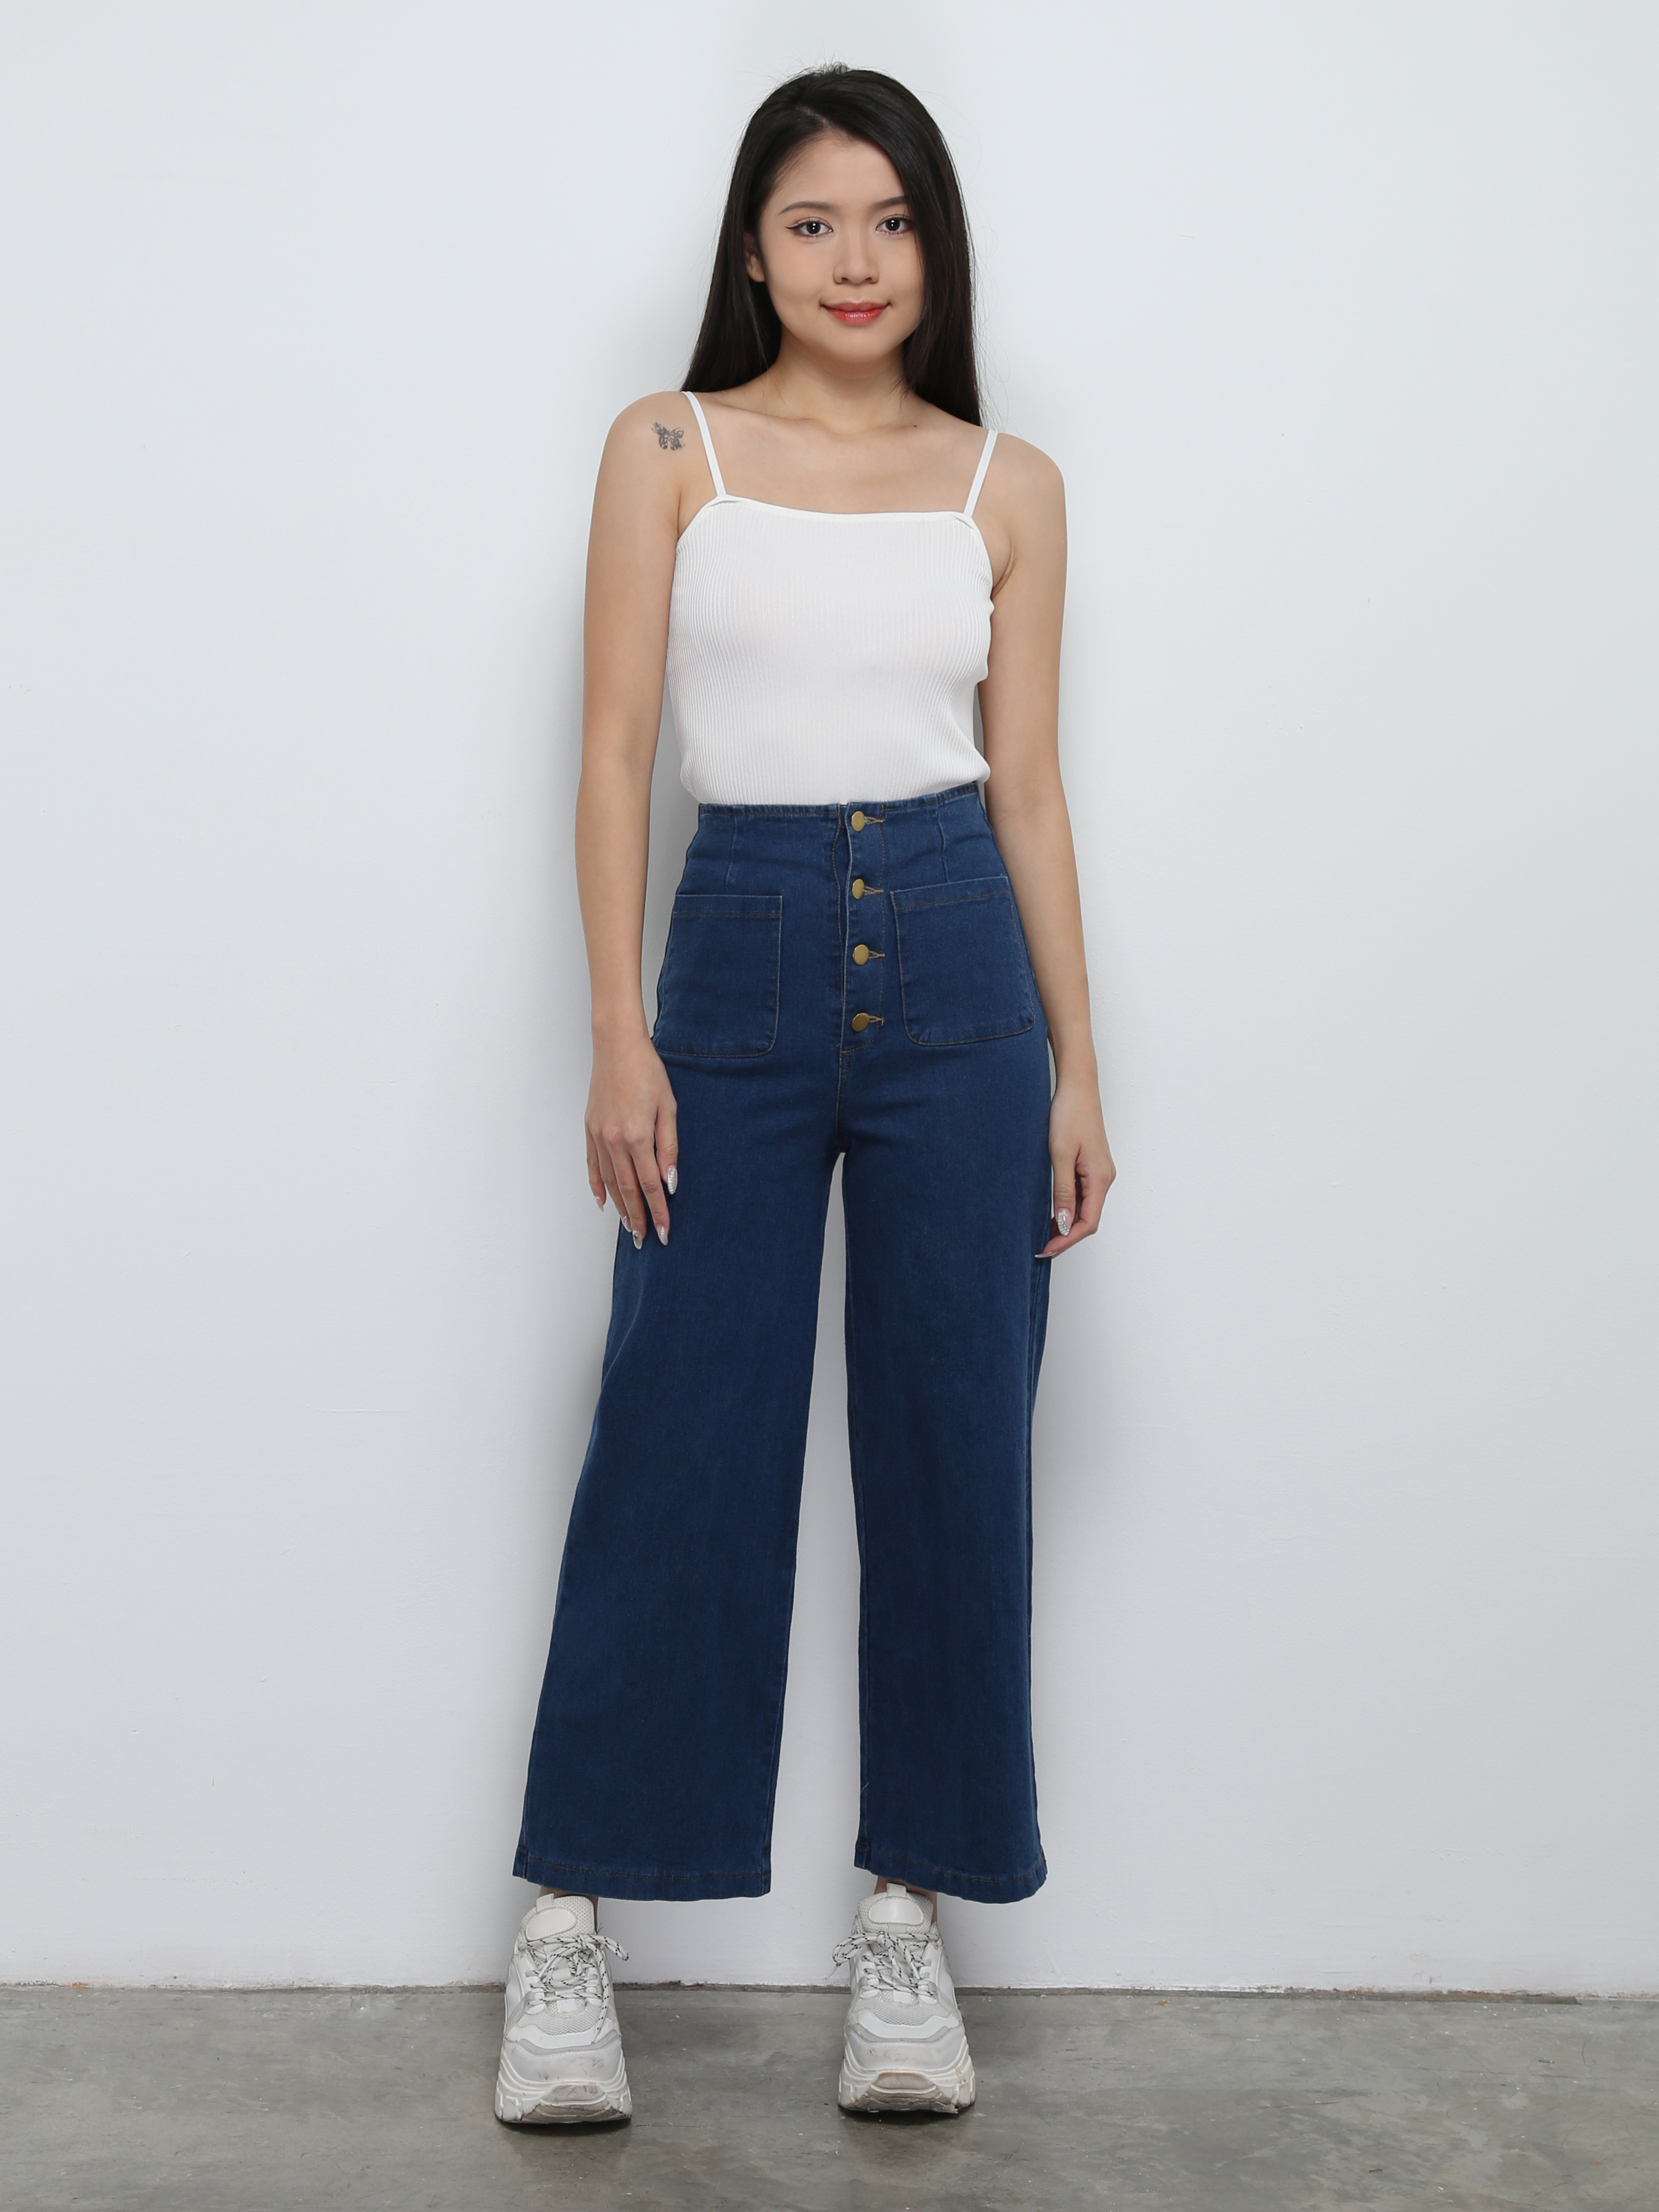 High Waist Front Breasted Button Denim Long Pants 29020